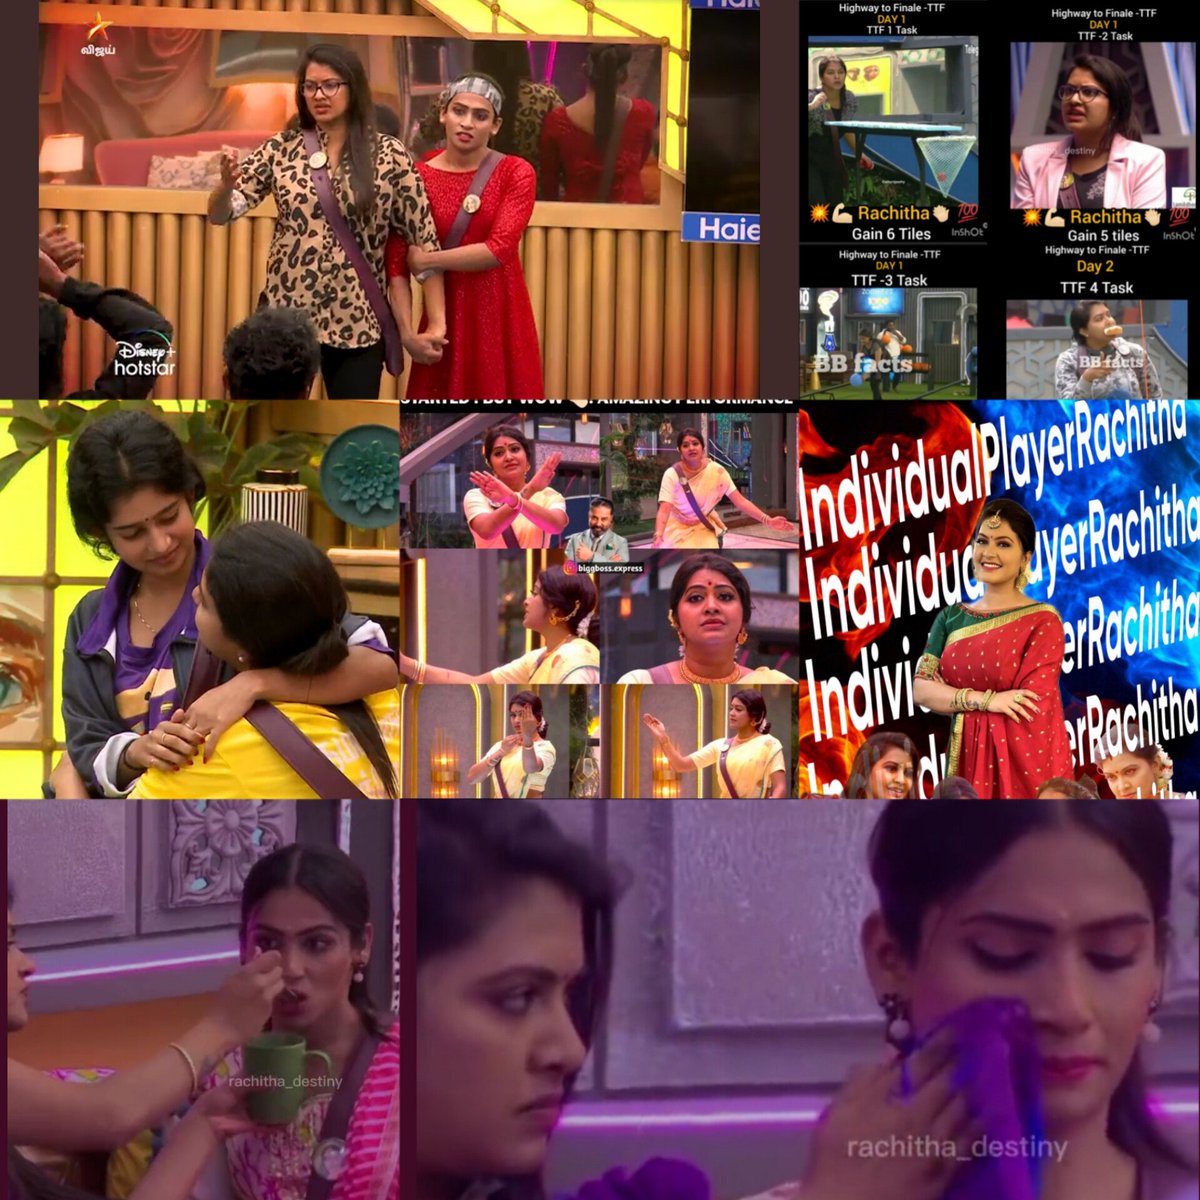 2022 Best! 
I'm so happy I got knew abt Rachita Mahalaksmi as Person...she is really Gem. 
 
My  love for Rachita will be there Forever! 
But I'm Completely stop watching this crap content show for TRP 
 
Rachuma Take care da...

#Rachitha 
#IndividualPlayerRachitha